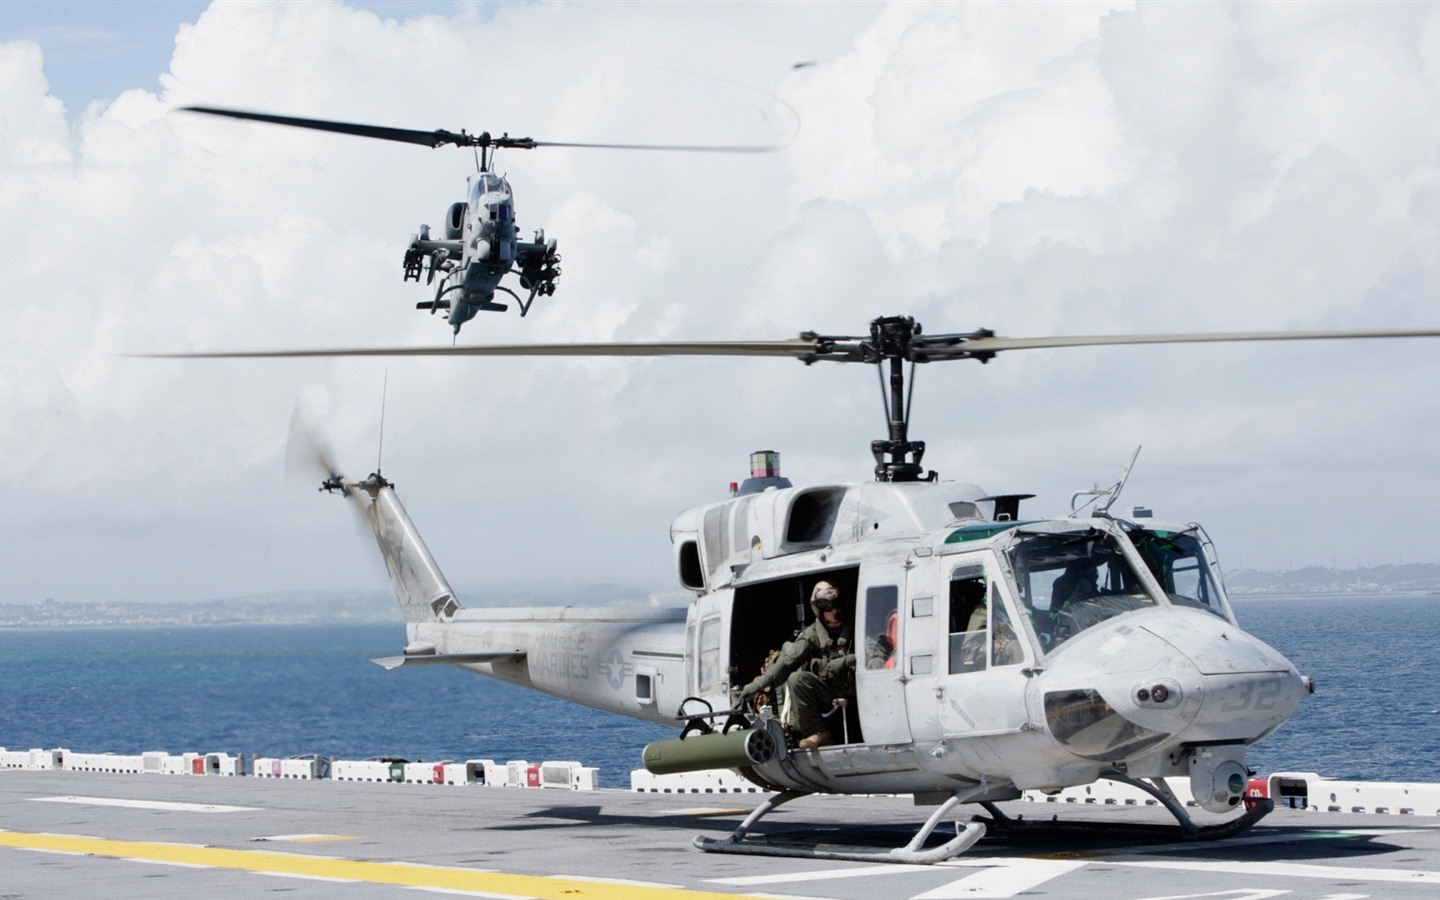 Military helicopters HD wallpapers #16 - 1440x900